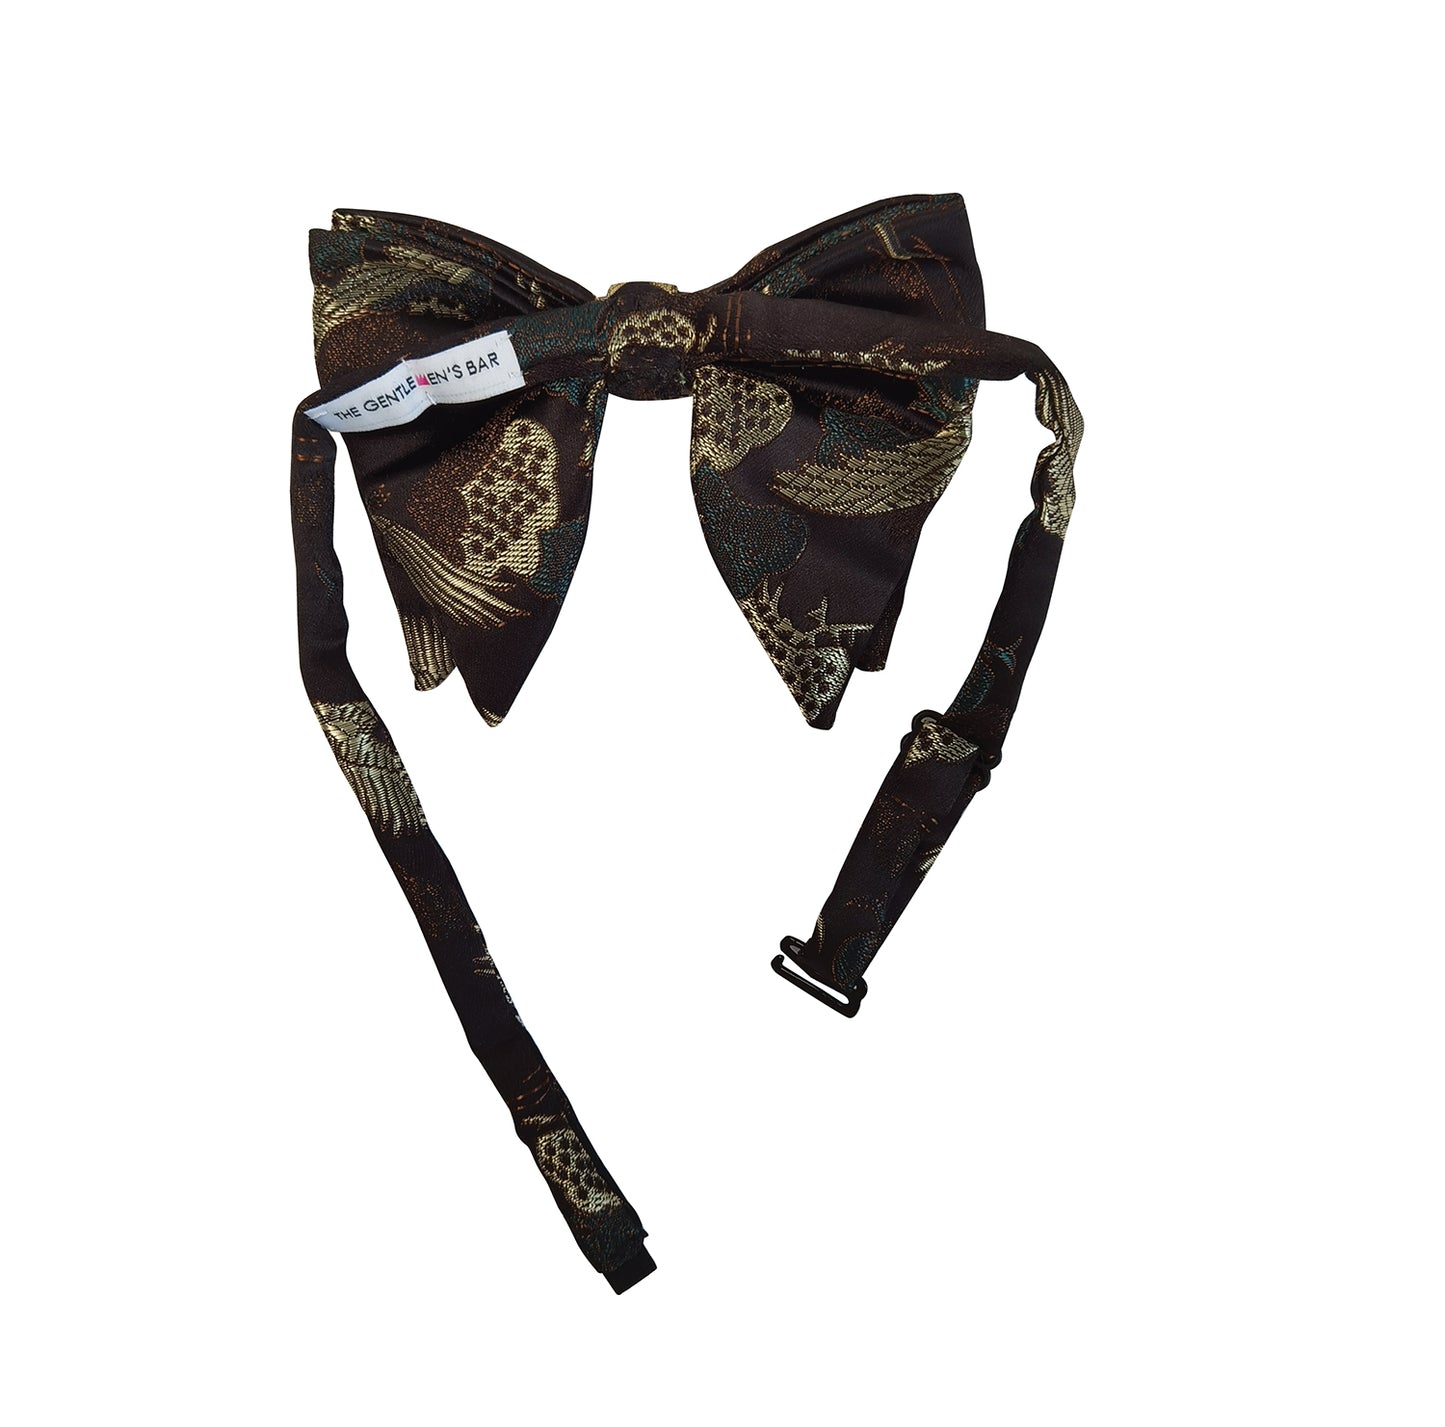 THE REO B BOWTIE (BUTTERFLY)